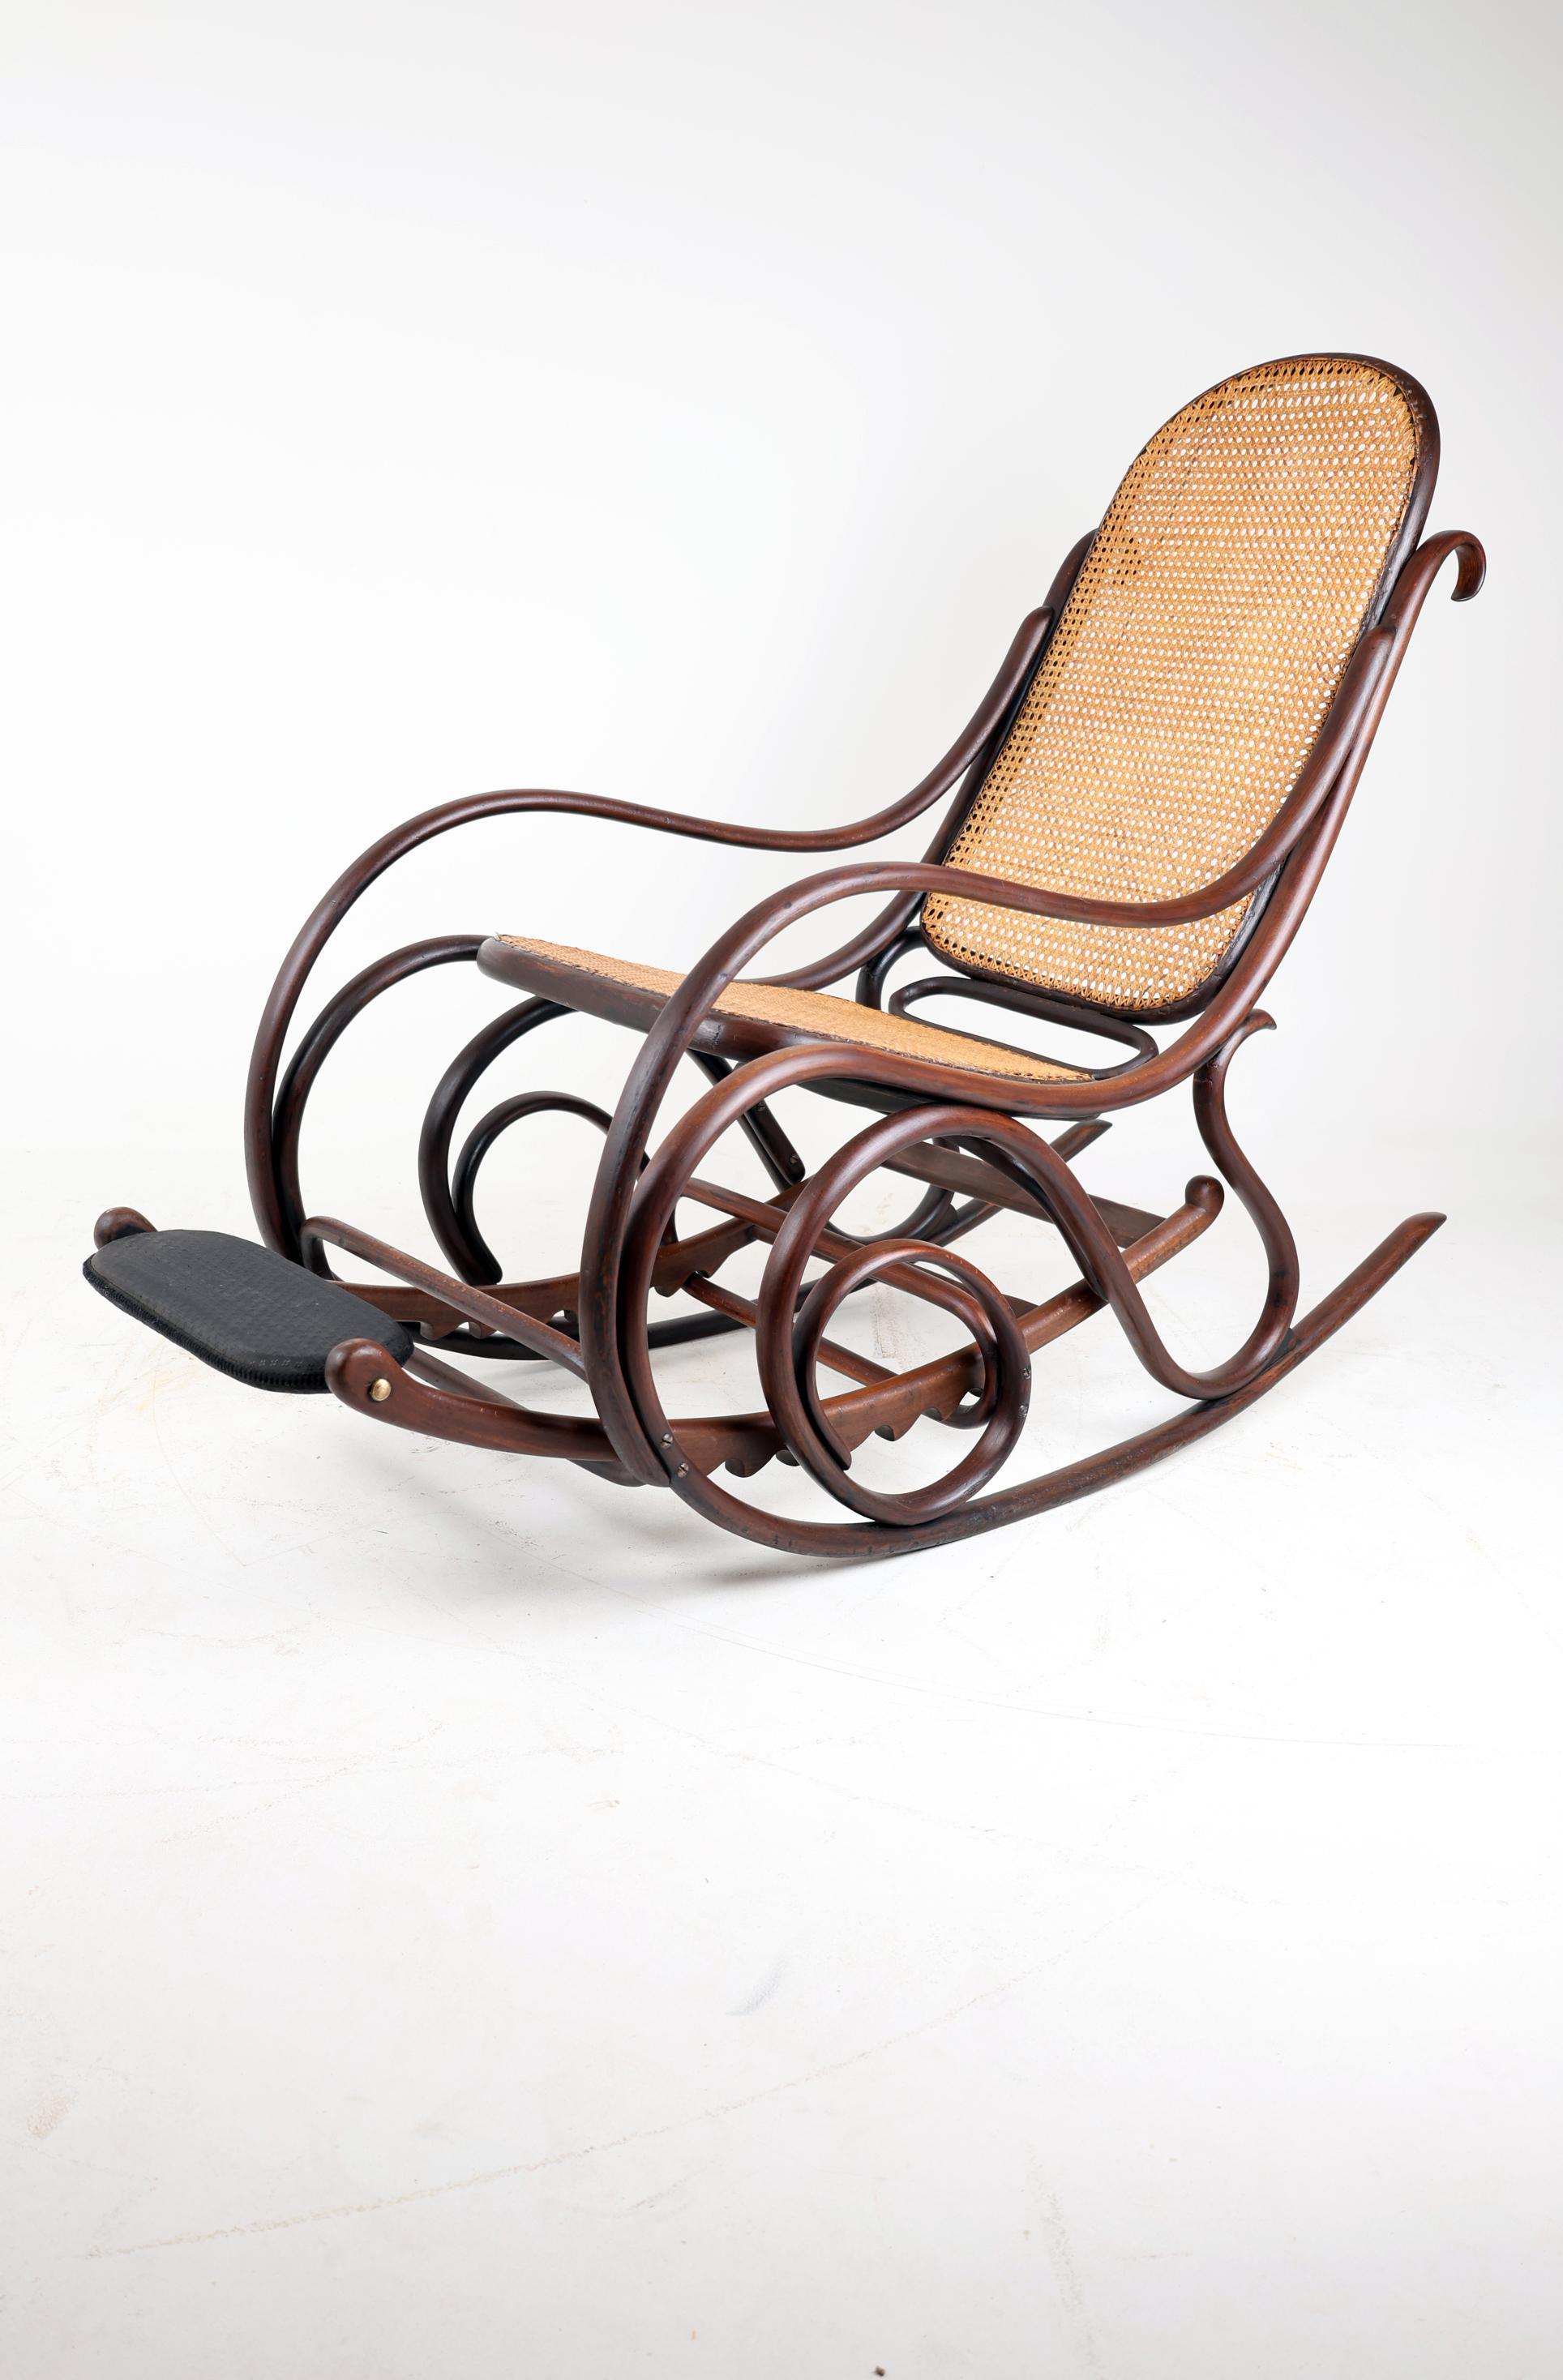 Rocking Chair And Its Footrest, Beech, Spirit 